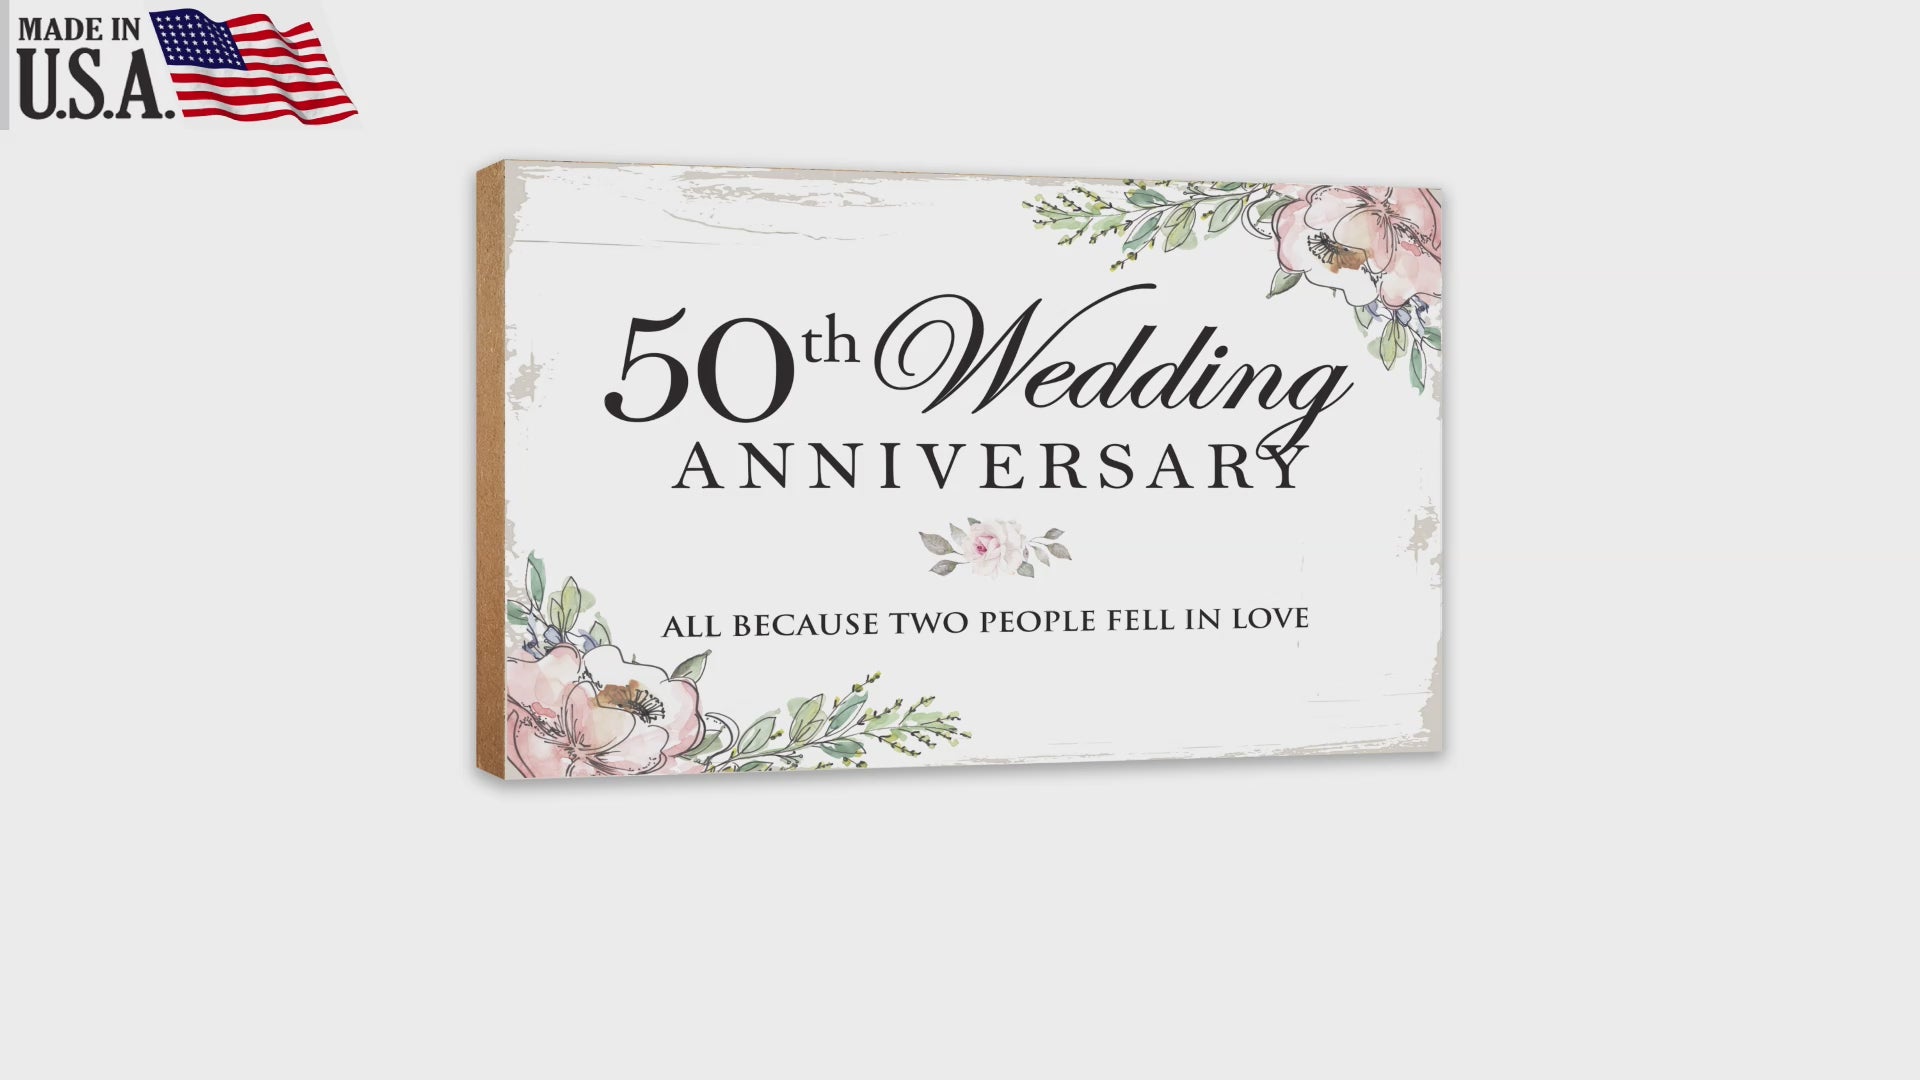 55th Wedding Anniversary Unique Shelf Decor and Tabletop Signs Gifts for Couples - Every Love Story